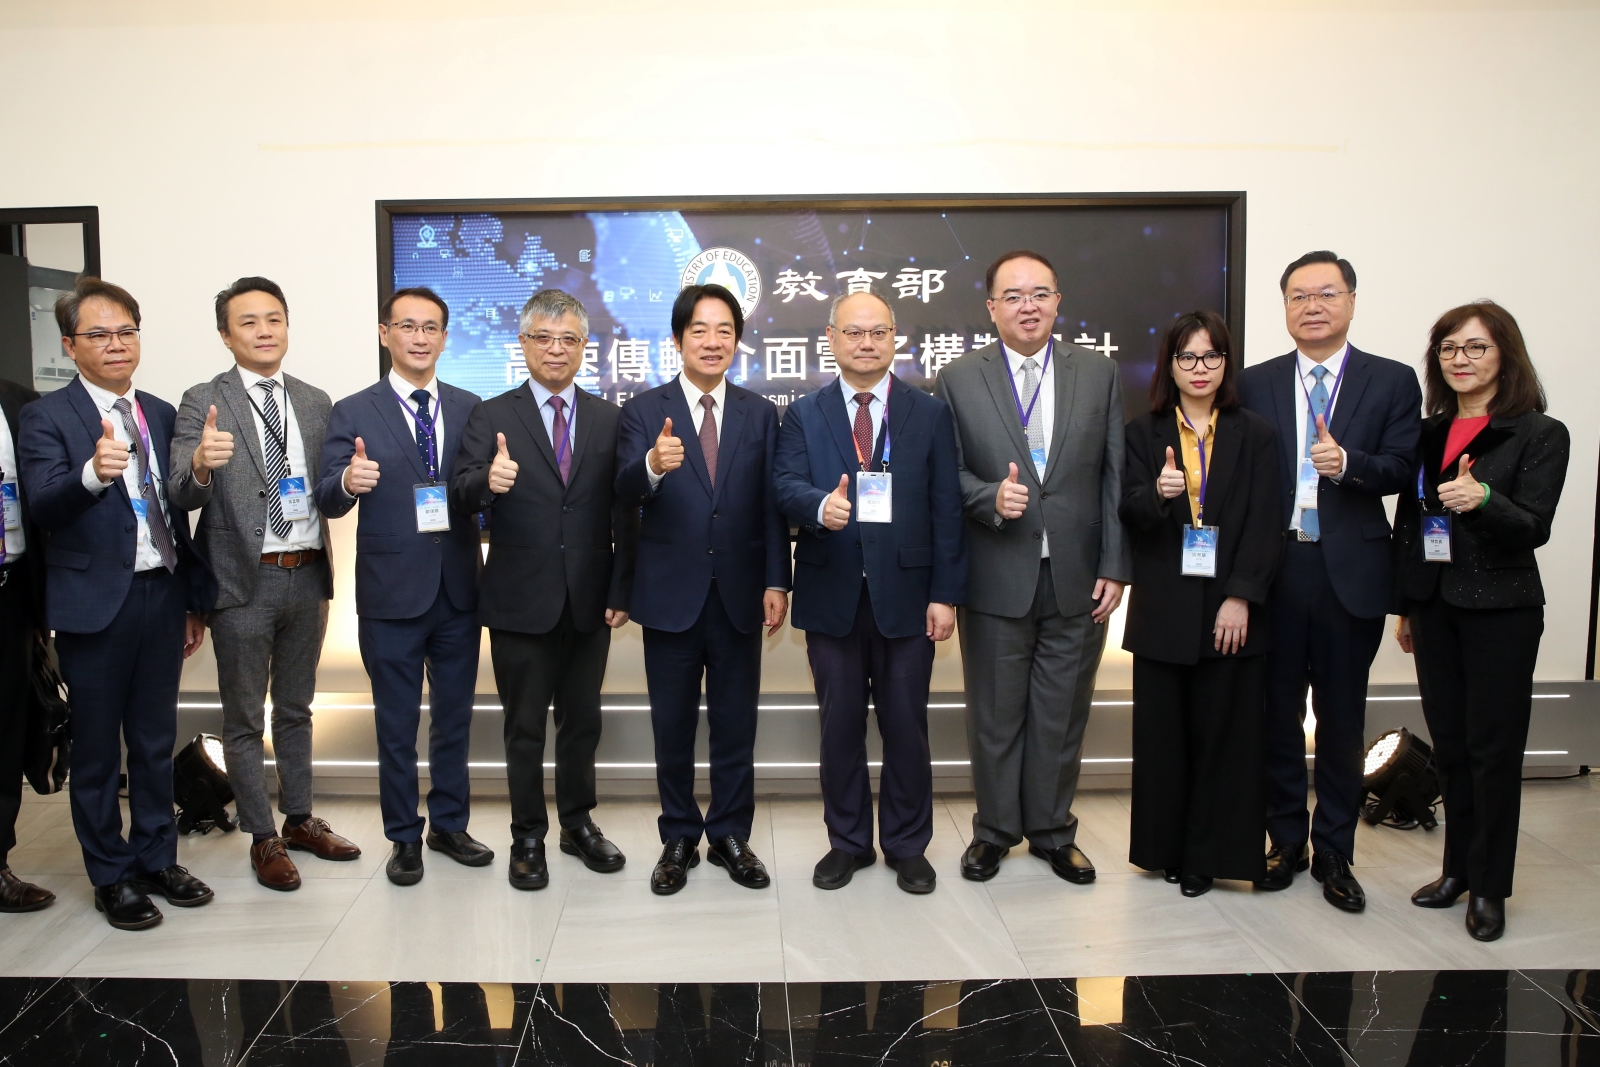 Vice President Lai and other distinguished guests were invited to Lunghwa University’s High-Speed Transmission Base to unveil the inauguration jointly.